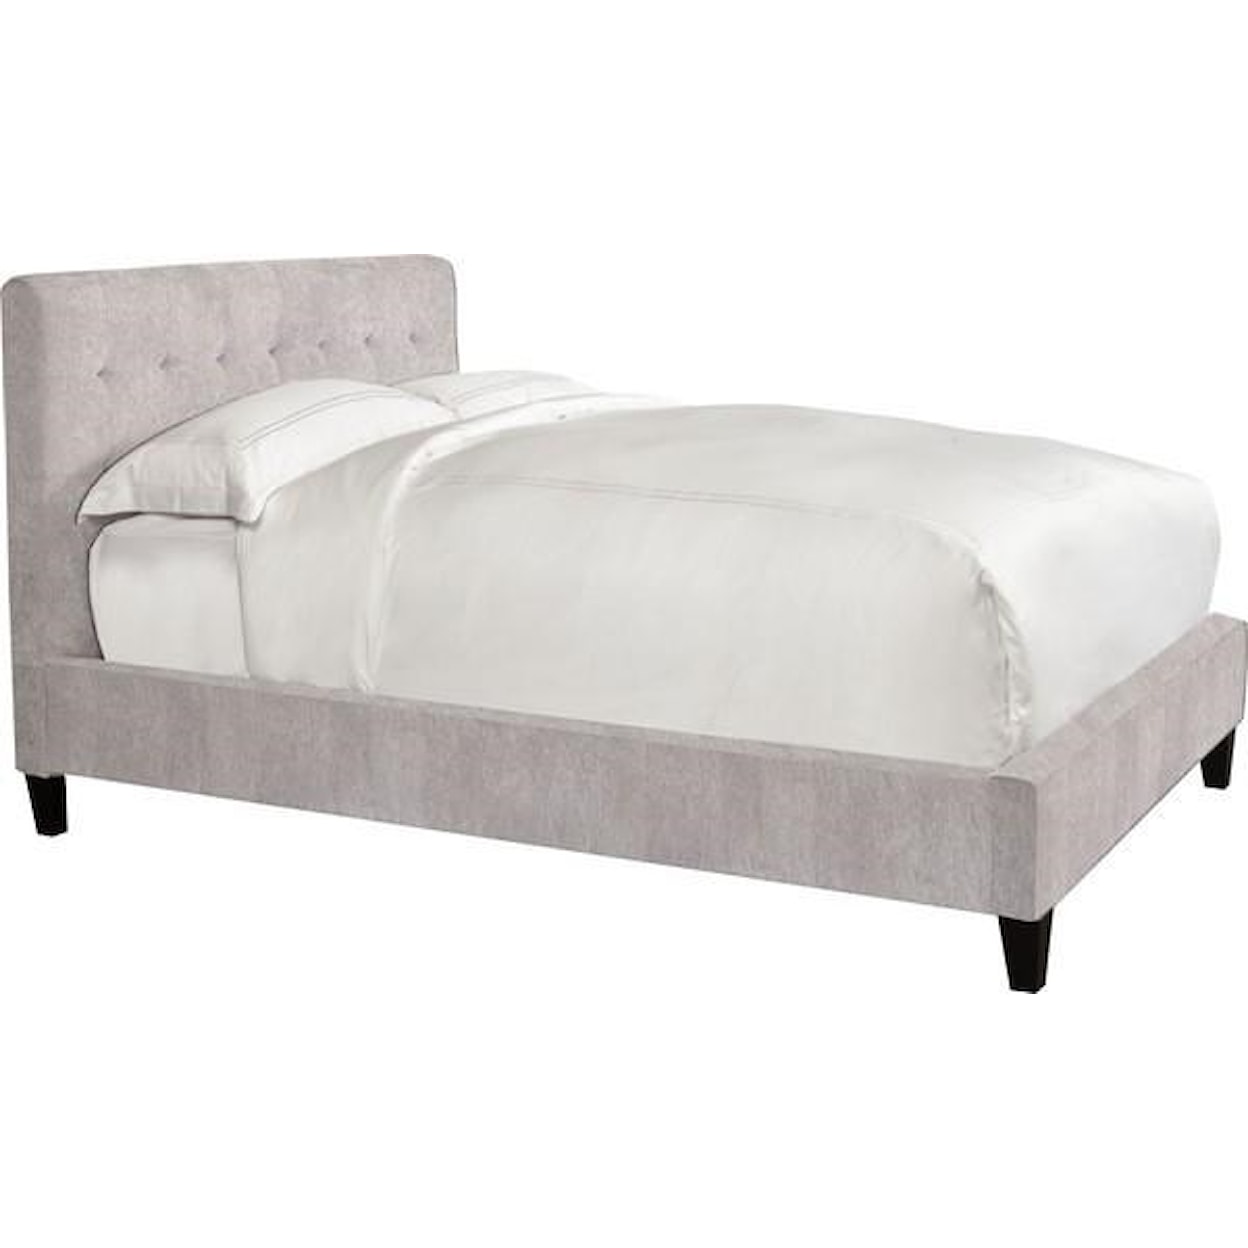 Parker House Judy Judy Upholstered Queen Bed